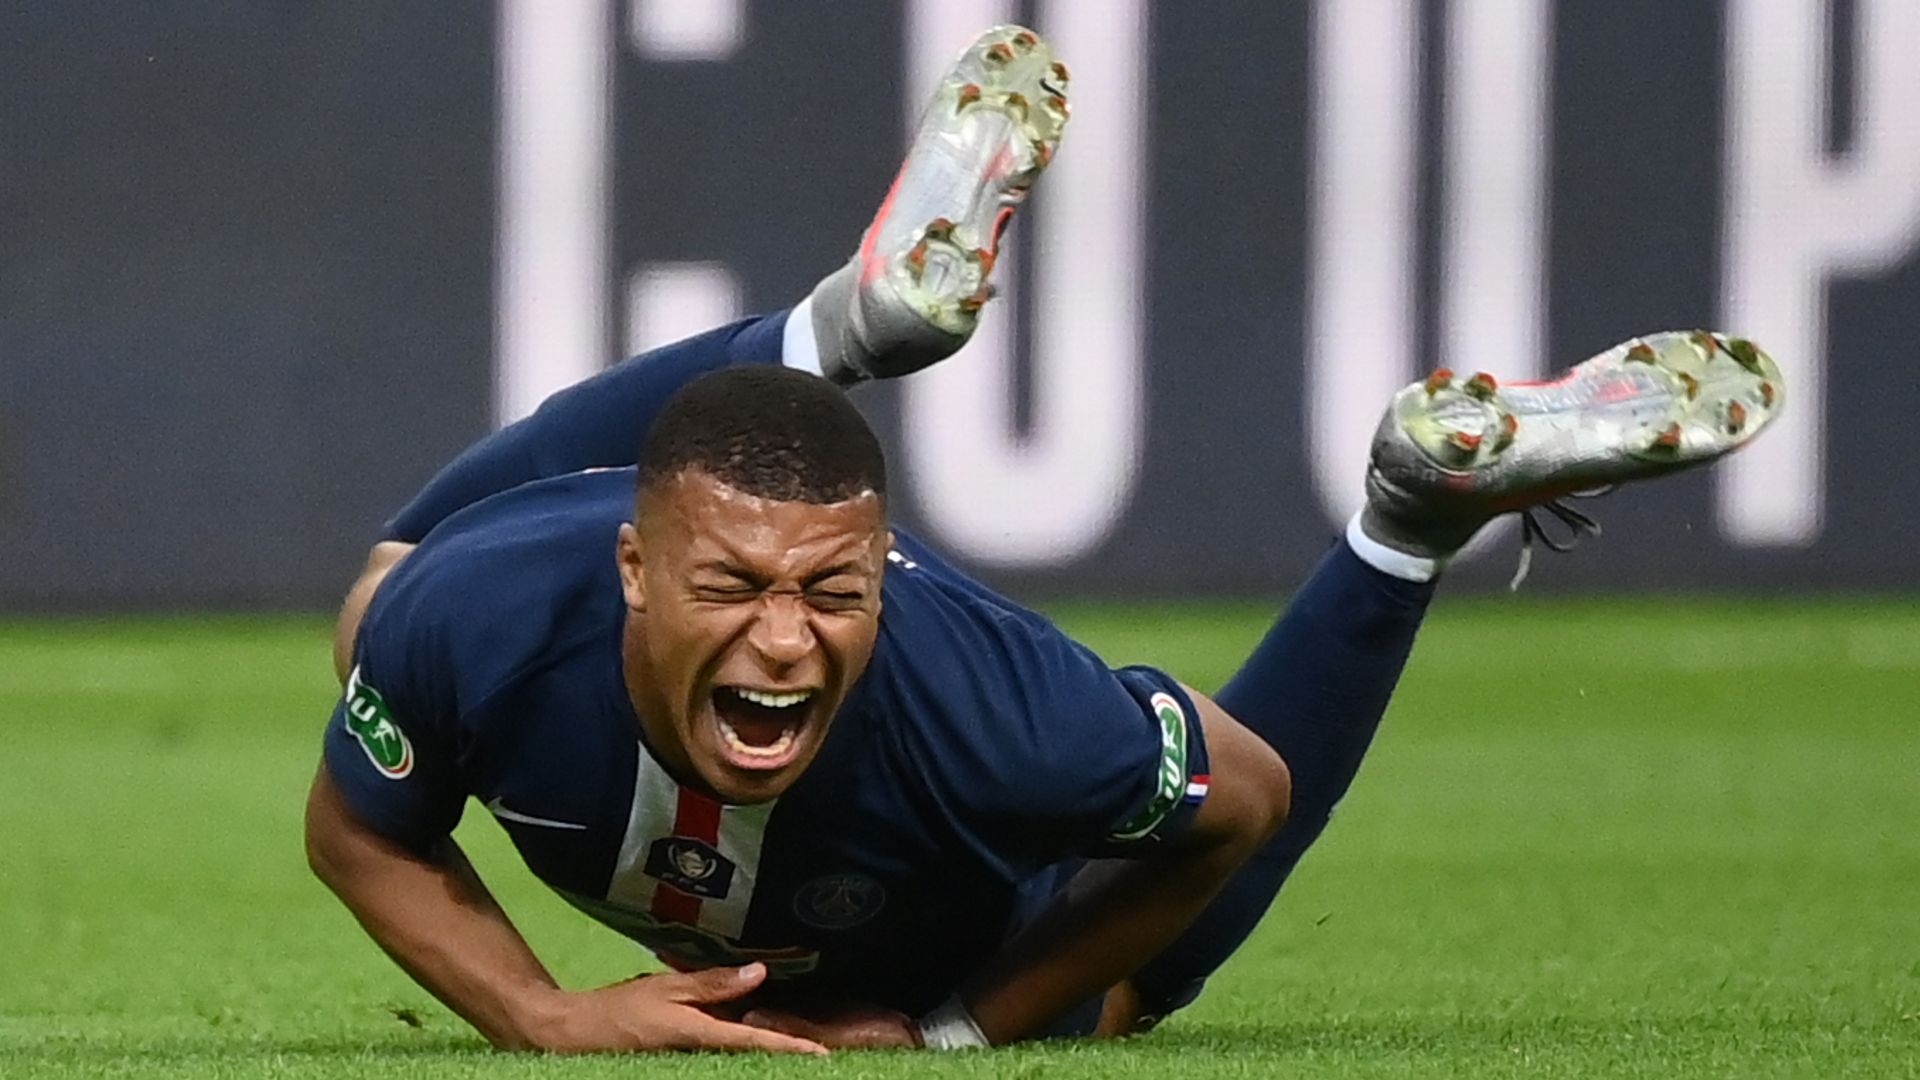 Mbappe on crutches after horror tackle